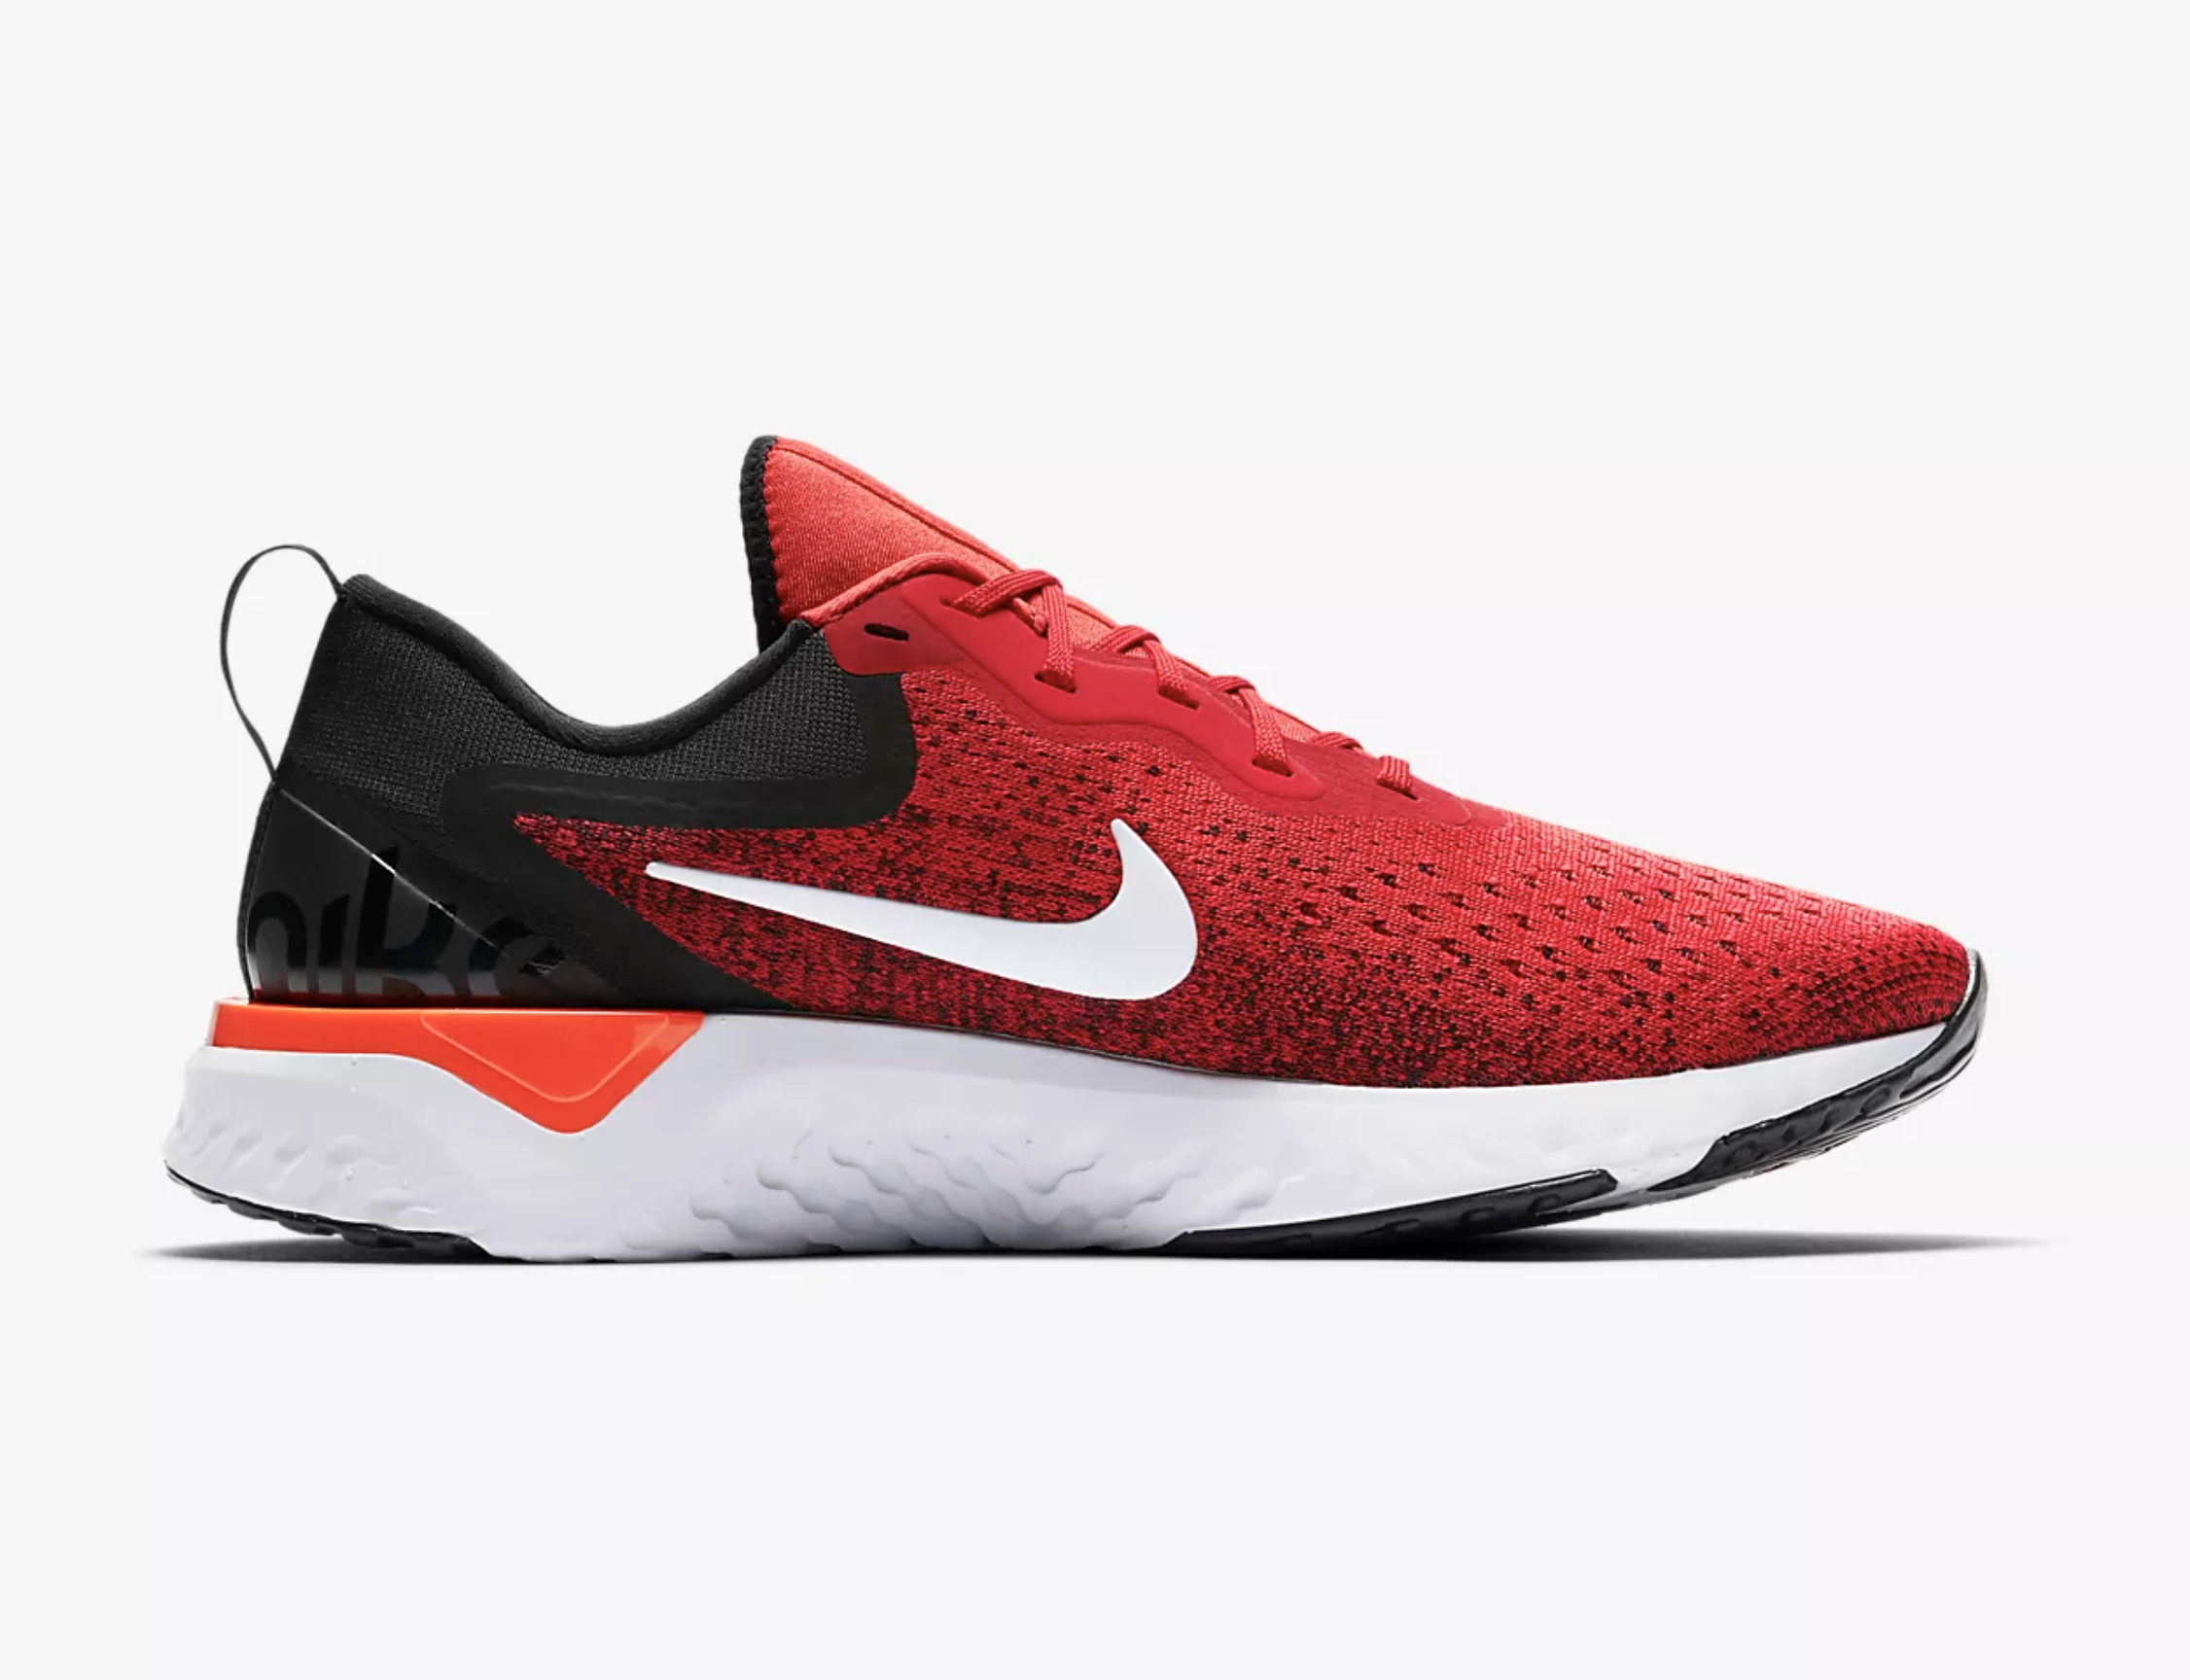 Now Available: Nike Odyssey React 